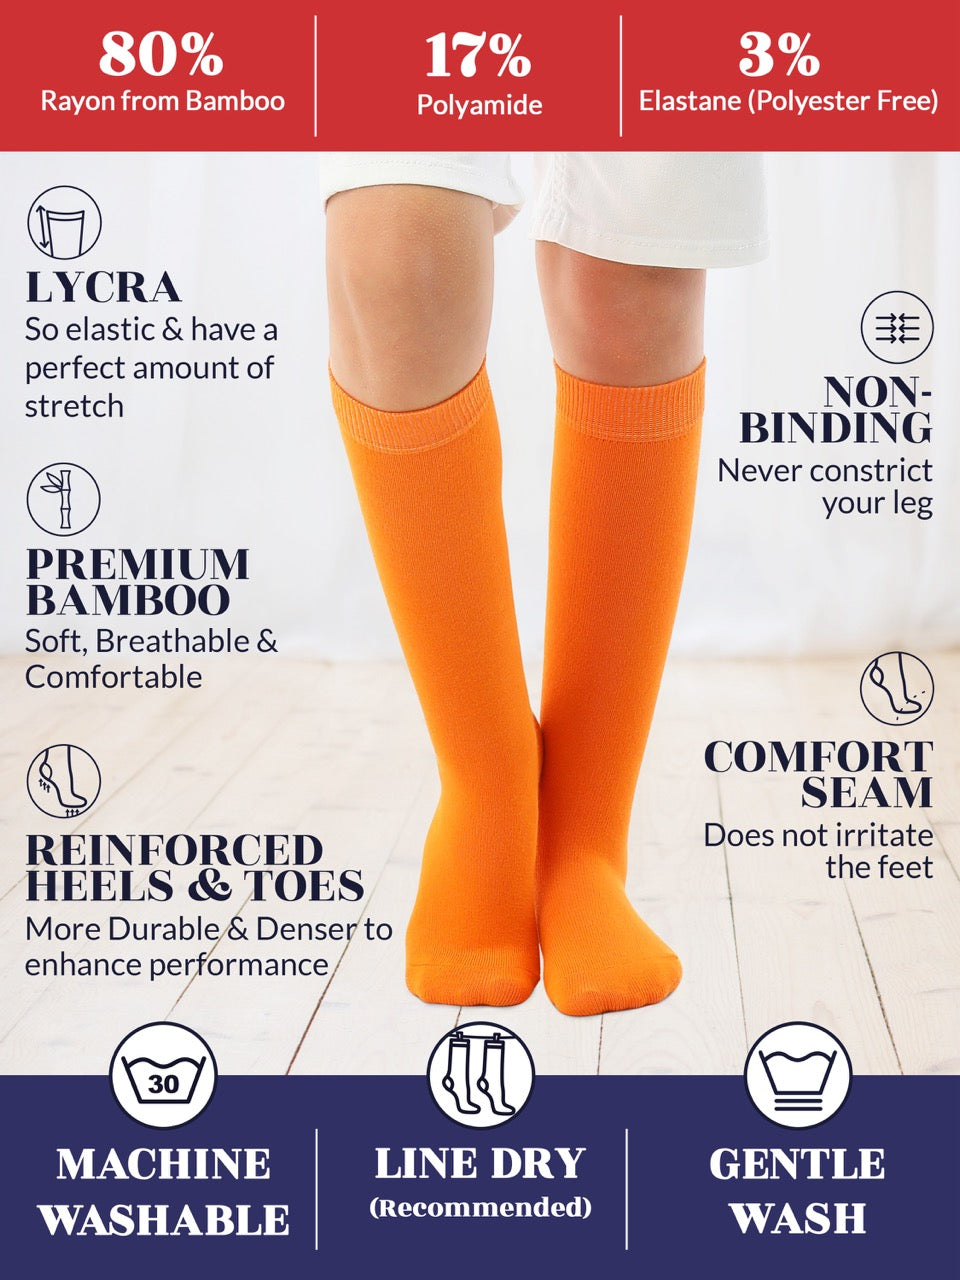 Experience the ultimate comfort and style with Hugh Ugoli Kids Bamboo School Socks. These pumpkin orange socks perfect for school or everyday wear, our high-quality knee-high socks meet uniform standards while reducing blisters and staying in place. Available in four sizes for children aged 3-14 years